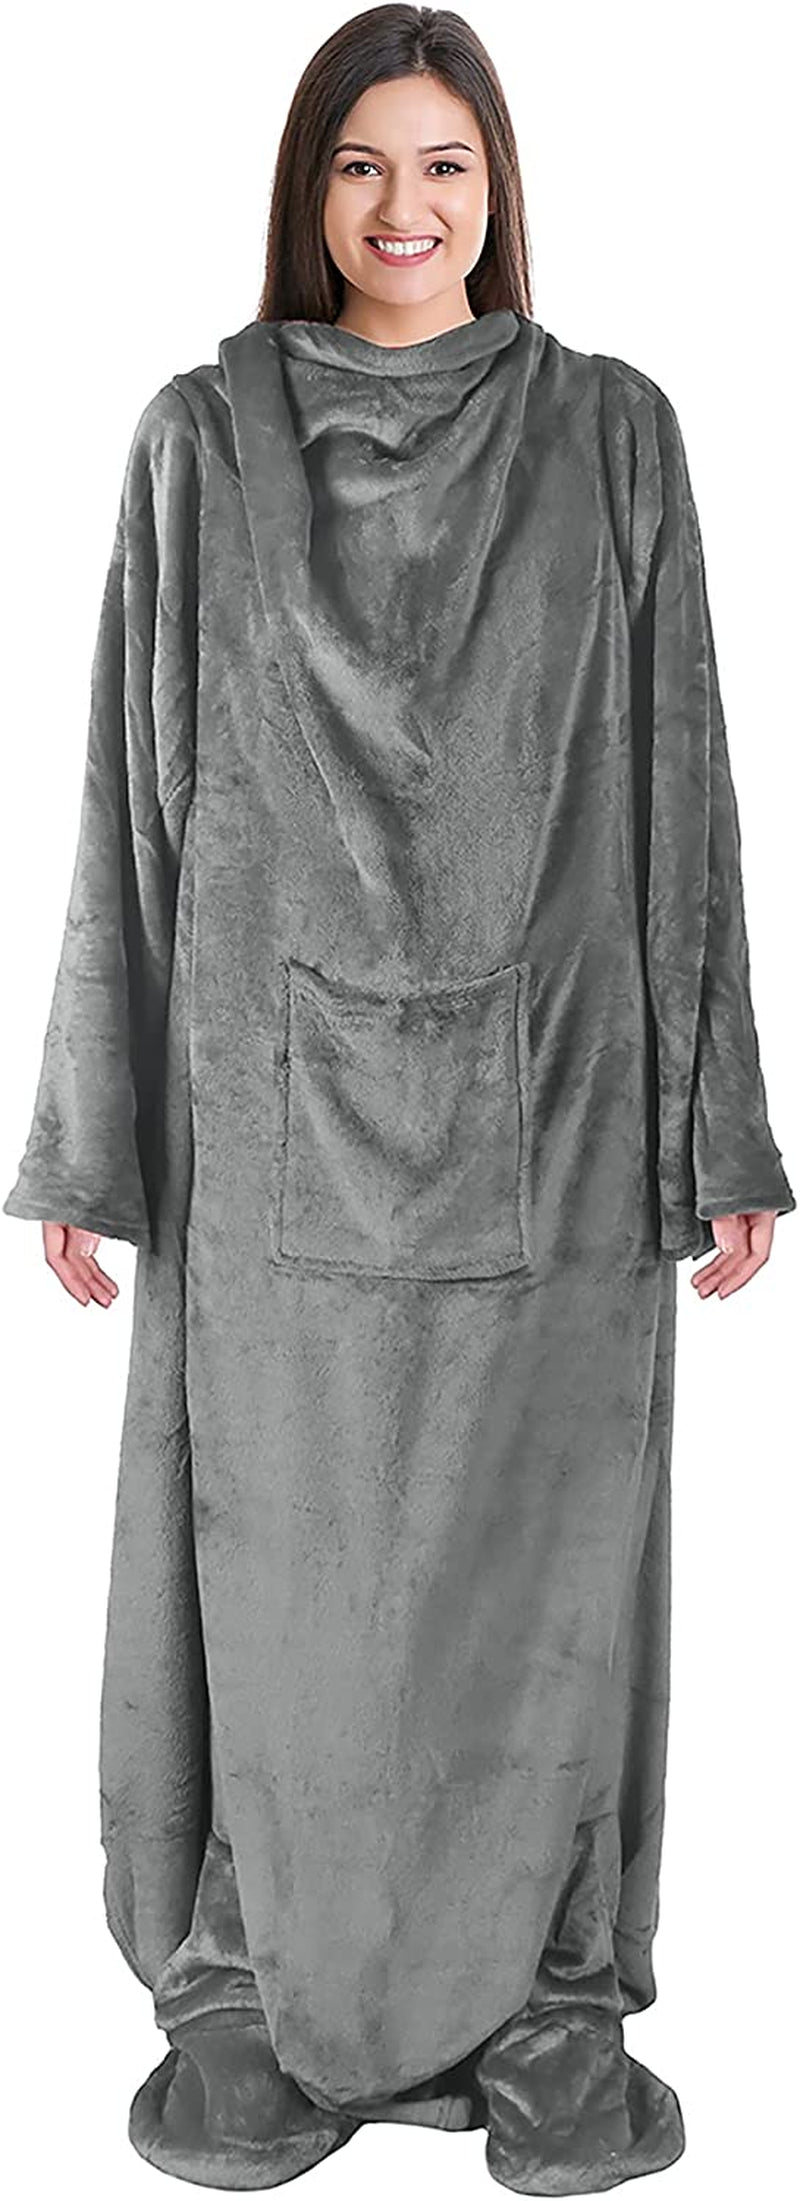 Wearable Fleece/Sherpa Blanket with Sleeves and Foot Pockets for Adult Women Men, Micro Plush Comfy Wrap Sleeved Throw Blanket Robe Large